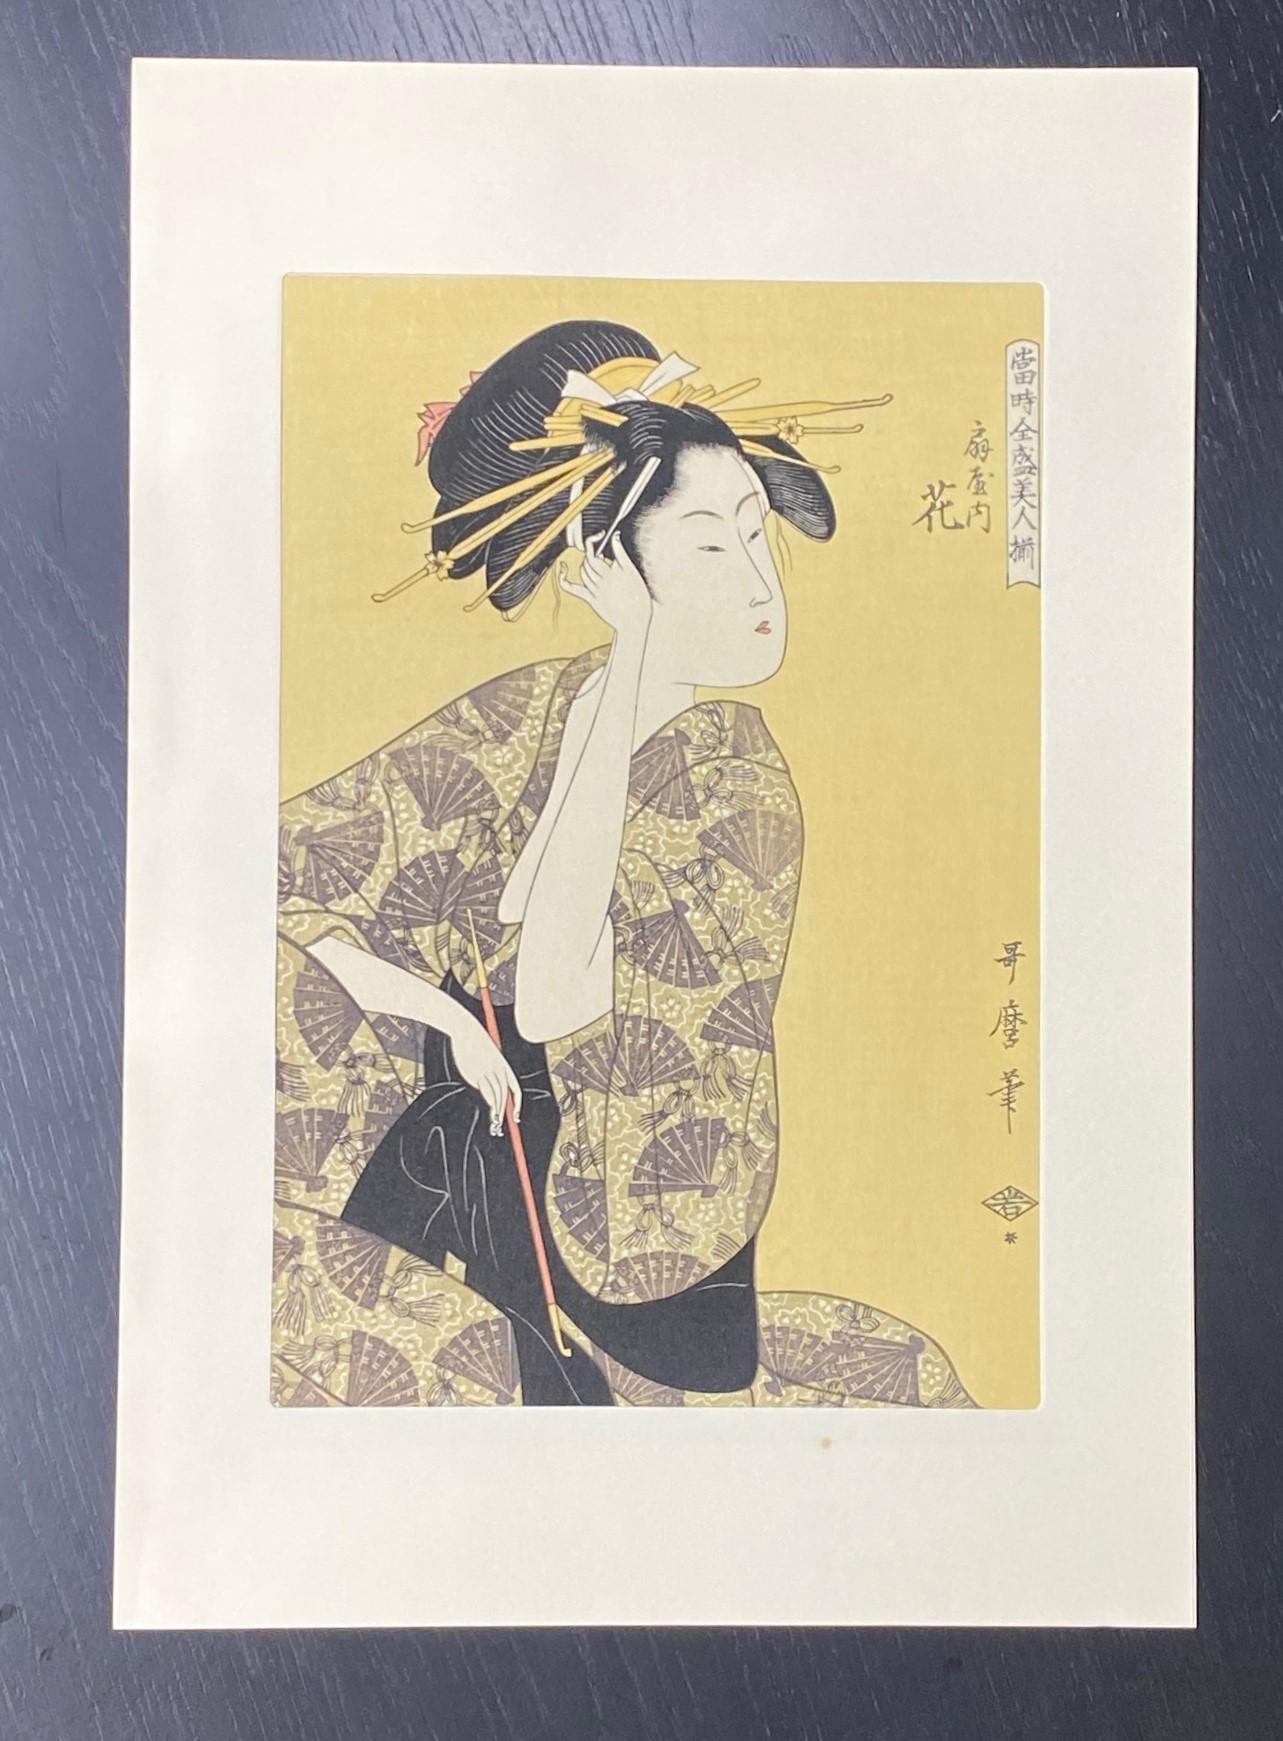 A beautifully composed and subtly colored Japanese woodblock print featuring a kimono-clad young woman, likely Geisha, adjusting her multitude of yellow hairpins (which match with the background) with an opium pipe in hand.  

This is likely a later